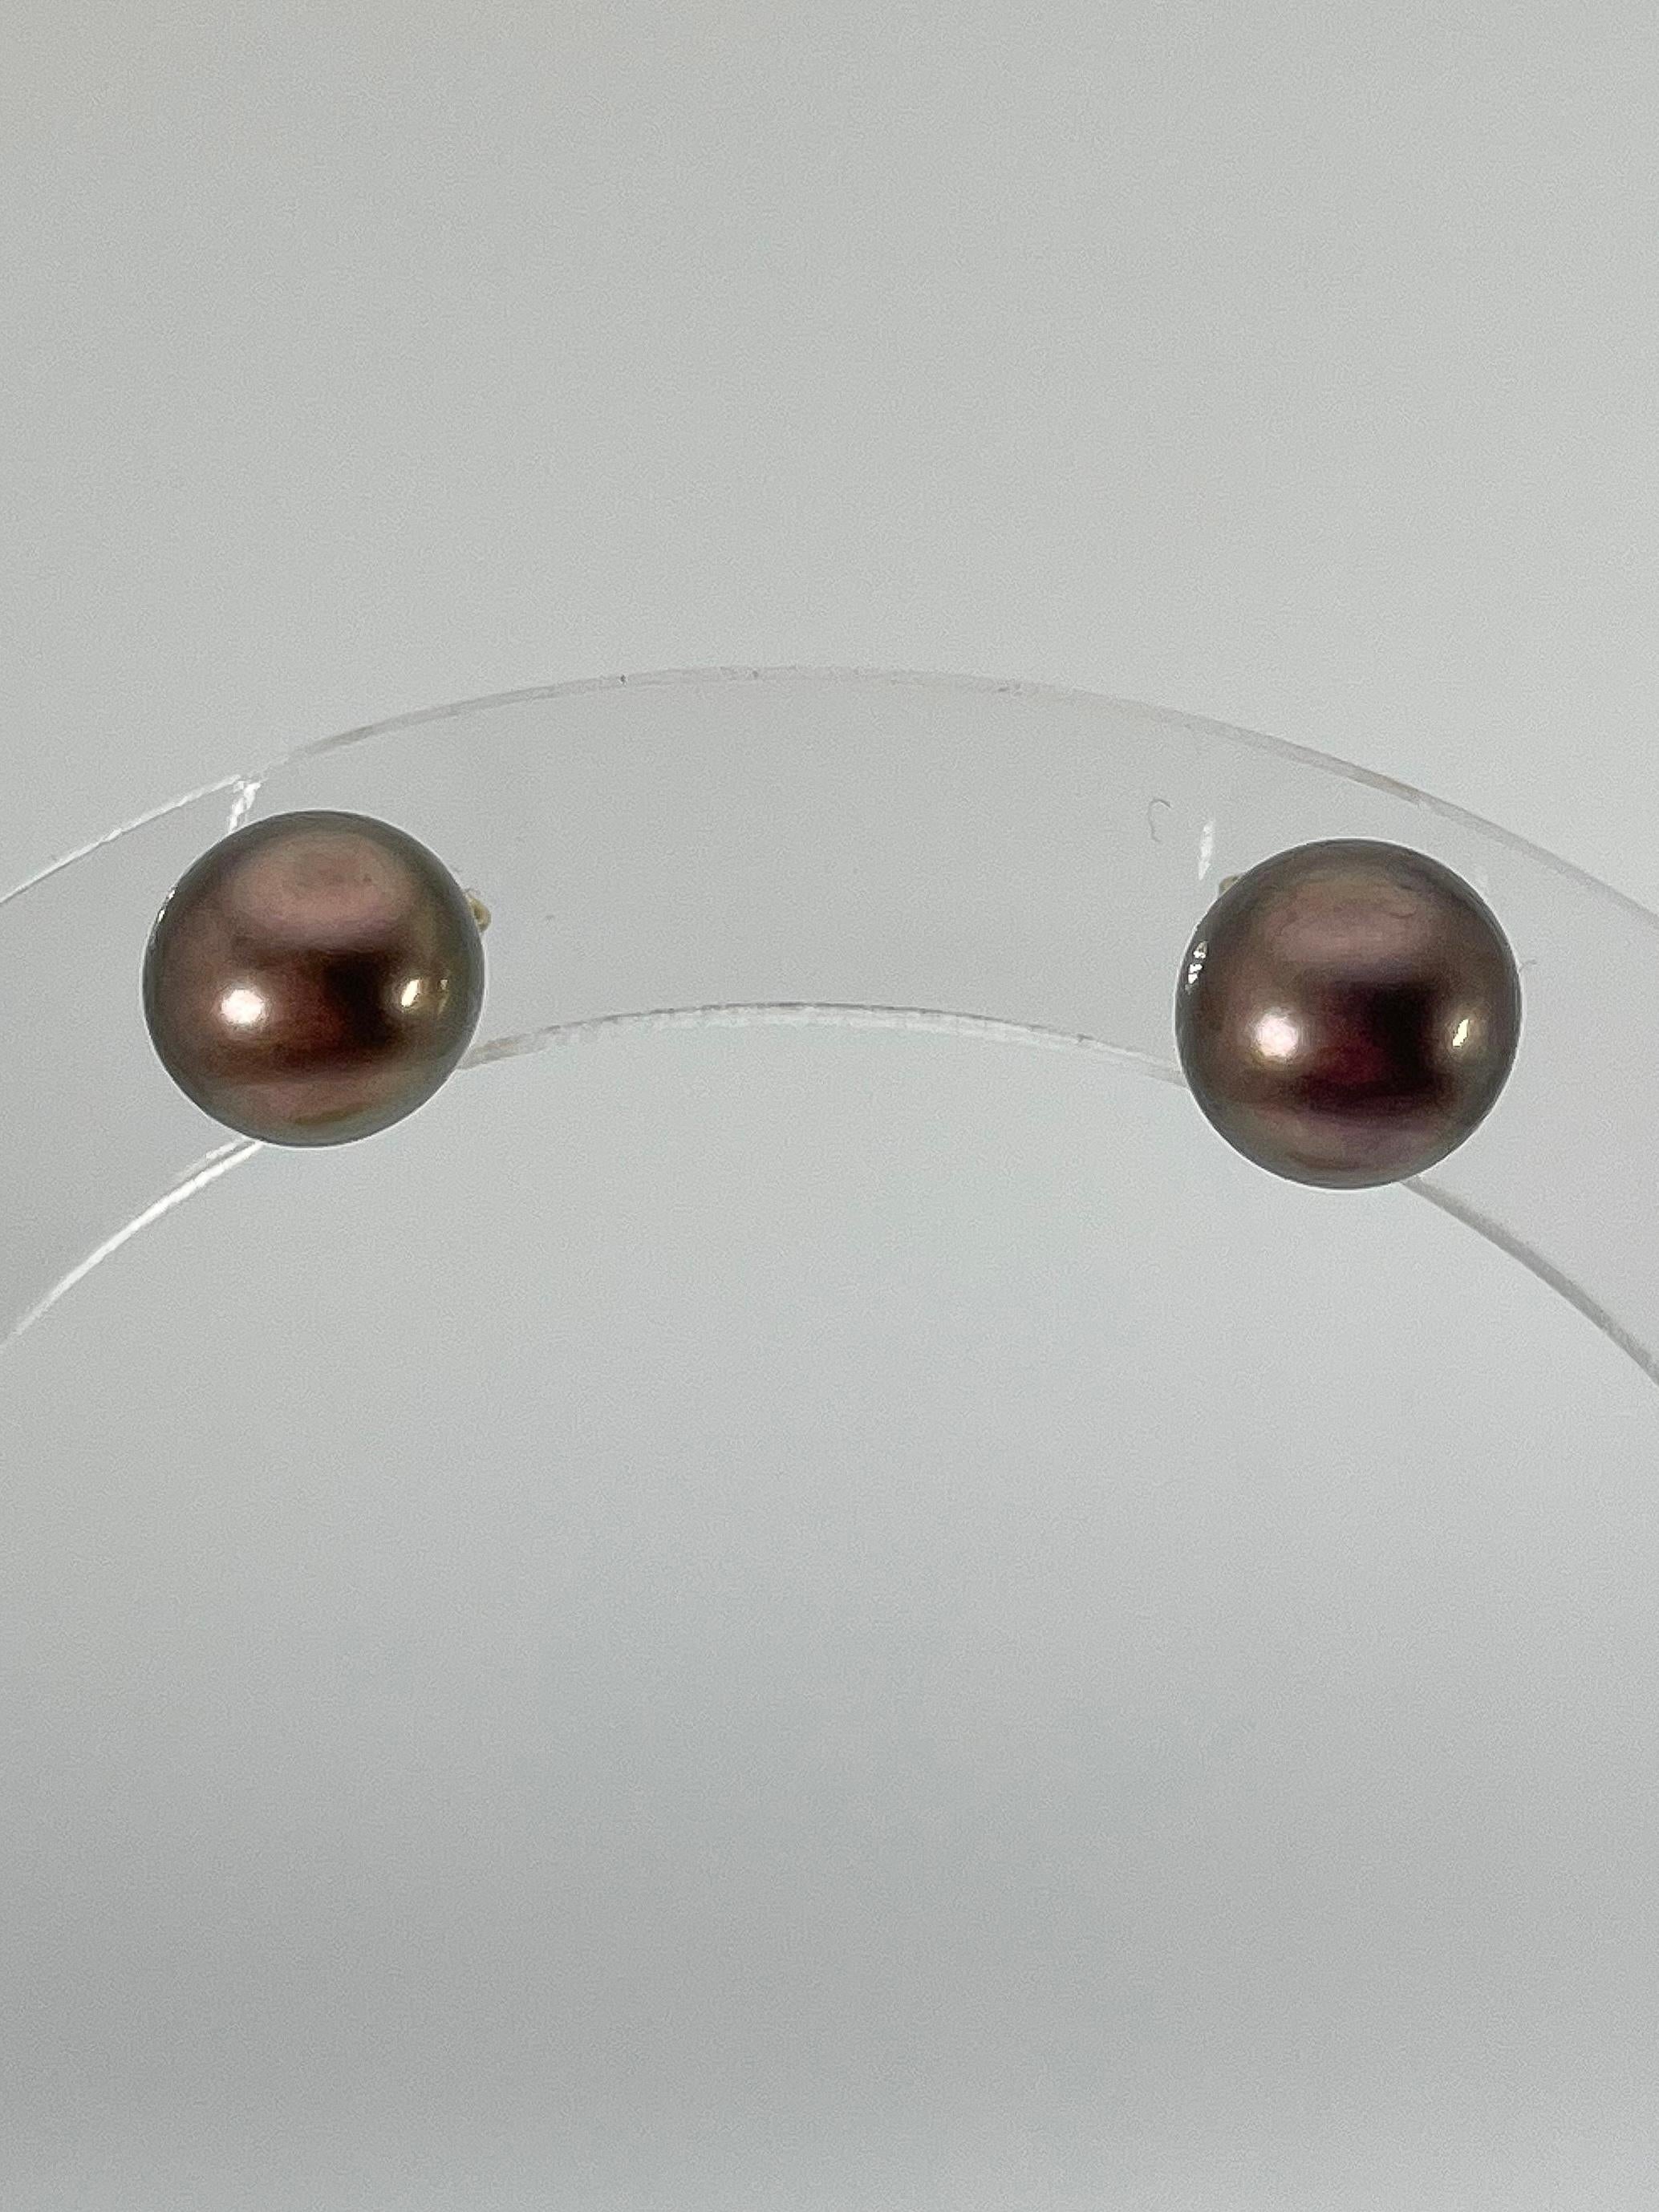 14k yellow gold 9mm copper Tahitian pearl stud earrings. These earrings have a total weight of 2.8.